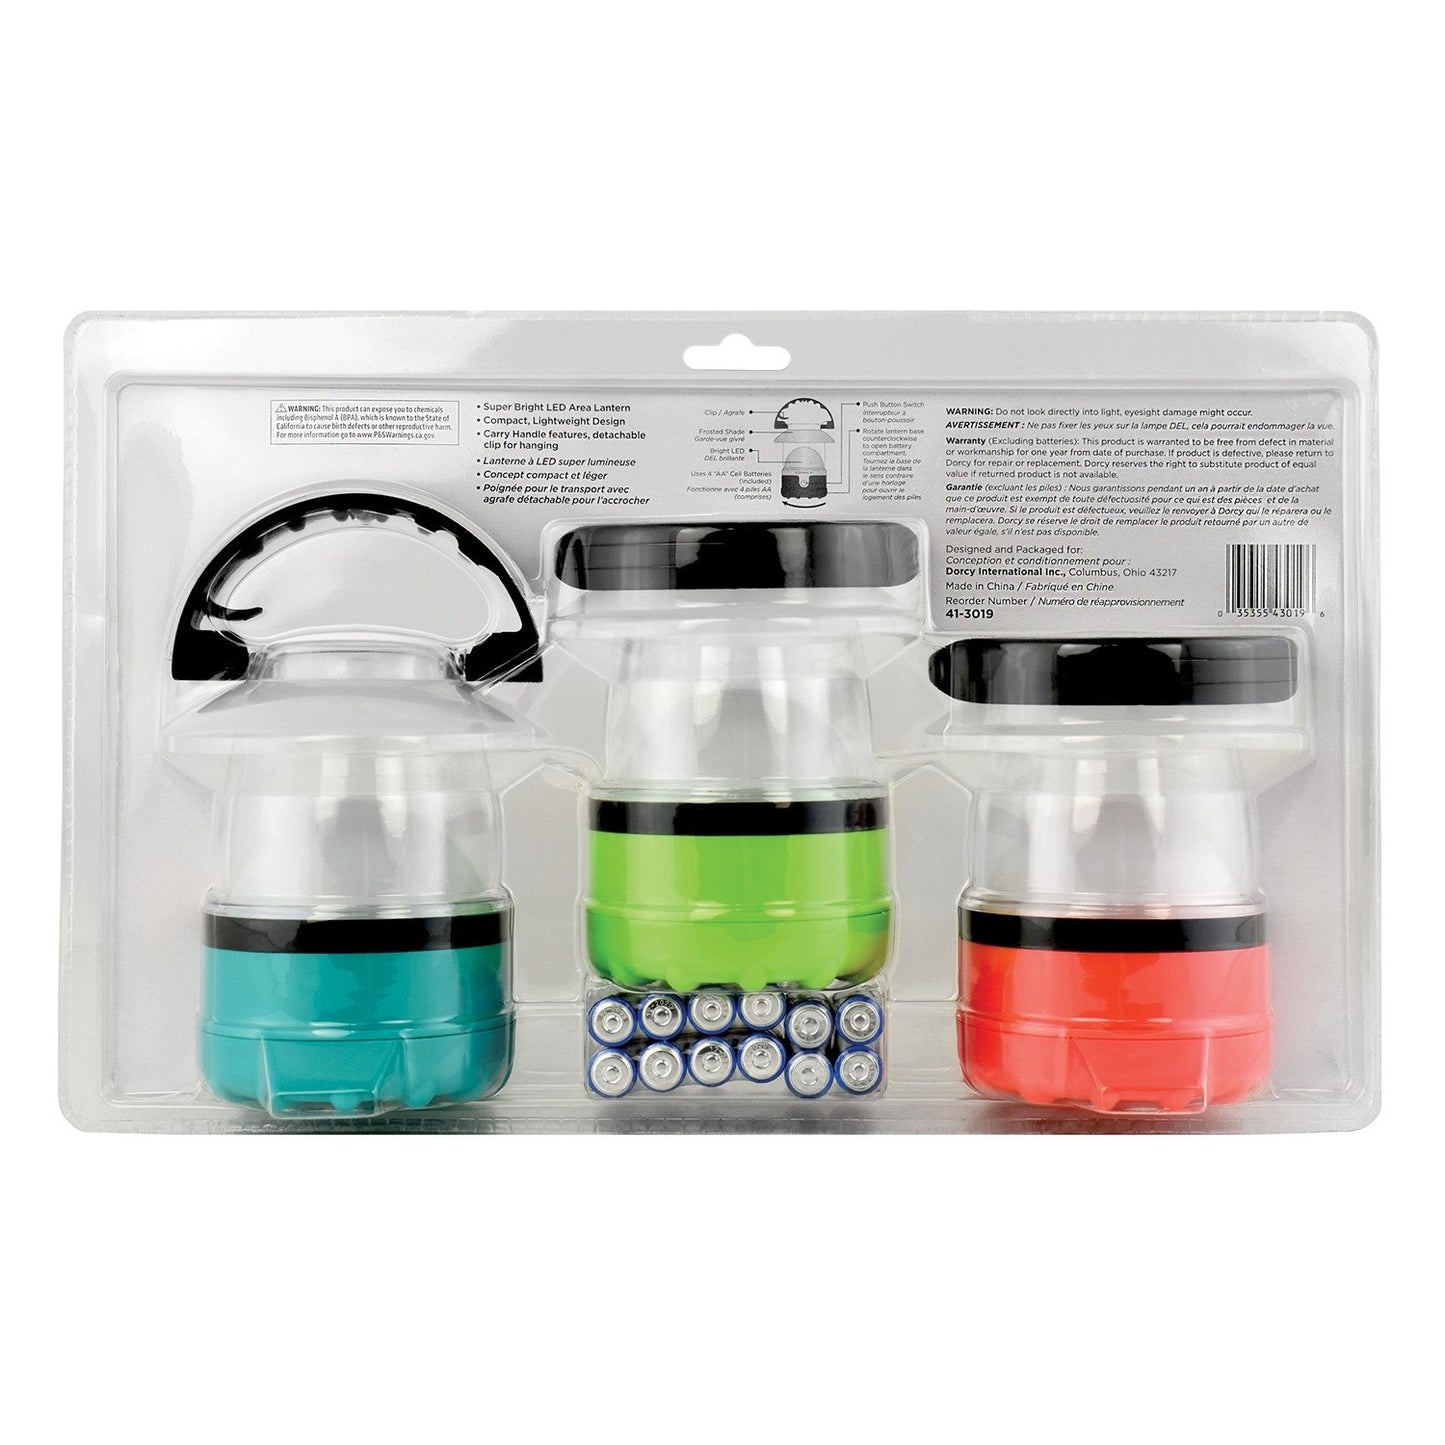 Dorcy 41-3019 LED Mini Lanterns with Batteries, 3 Pack